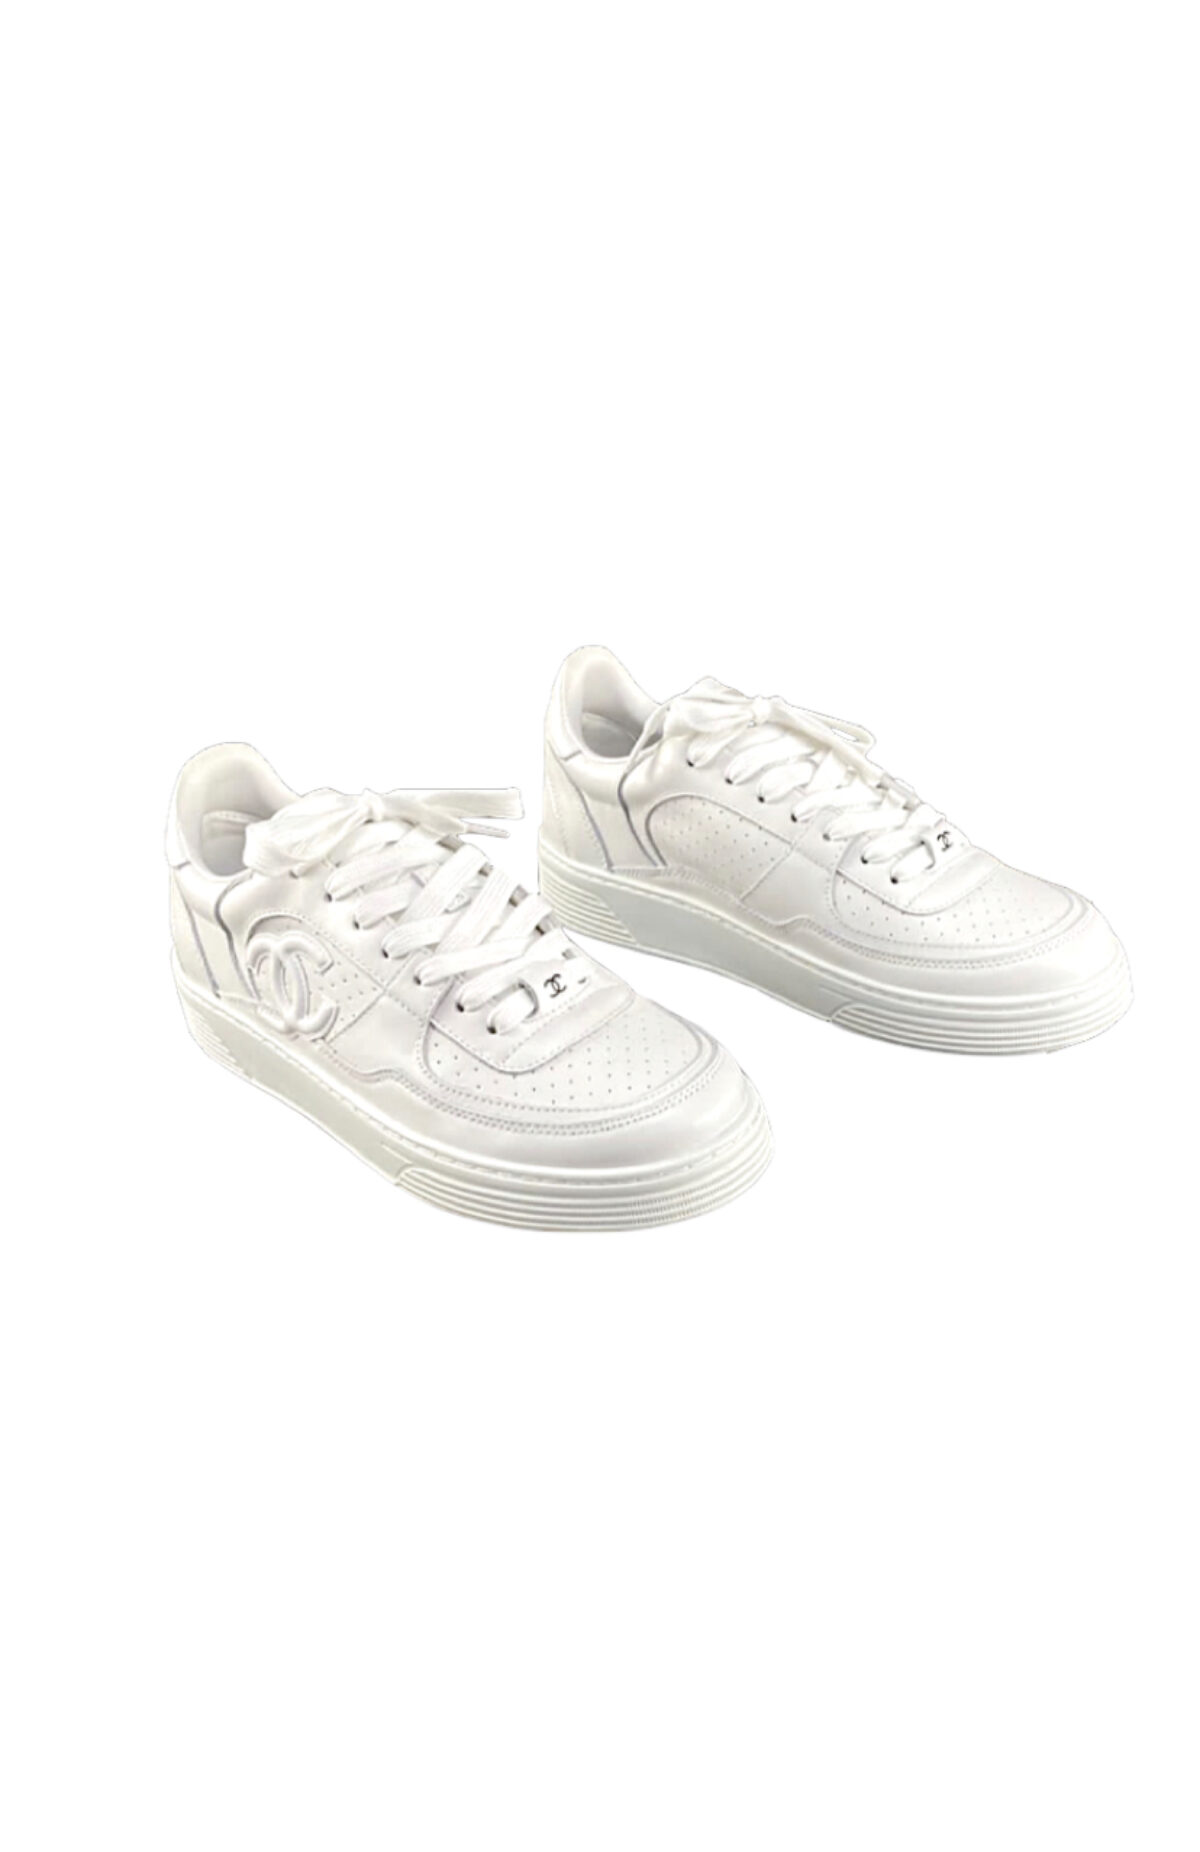 Chanel CC Logo White Calfskin Leather Sneakers 2023 Size 38 - Wornright  Authenticated Shopping